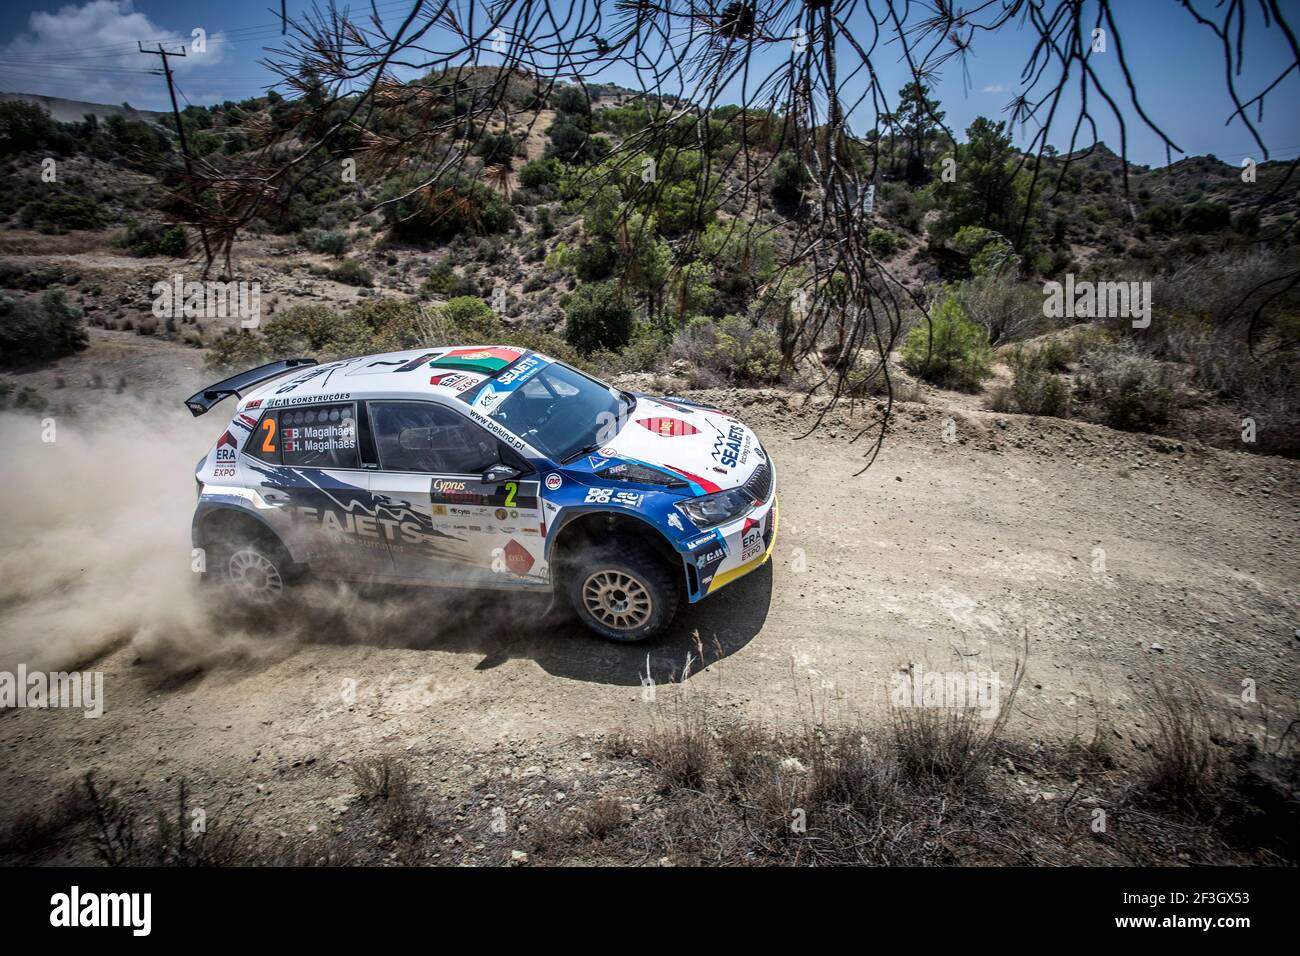 02 MAGALHAES Bruno (PRT), MAGALHAES, Hugo (PRT), BRUNO MIGUEL PINTO MAGALHAES PINHEIRO, SKODA FABIA R5, action during the 2018 European Rally Championship ERC Cyprus Rally, from june 15 to 17 at Larnaca, Cyprus - Photo Gregory Lenormand / DPPI Stock Photo